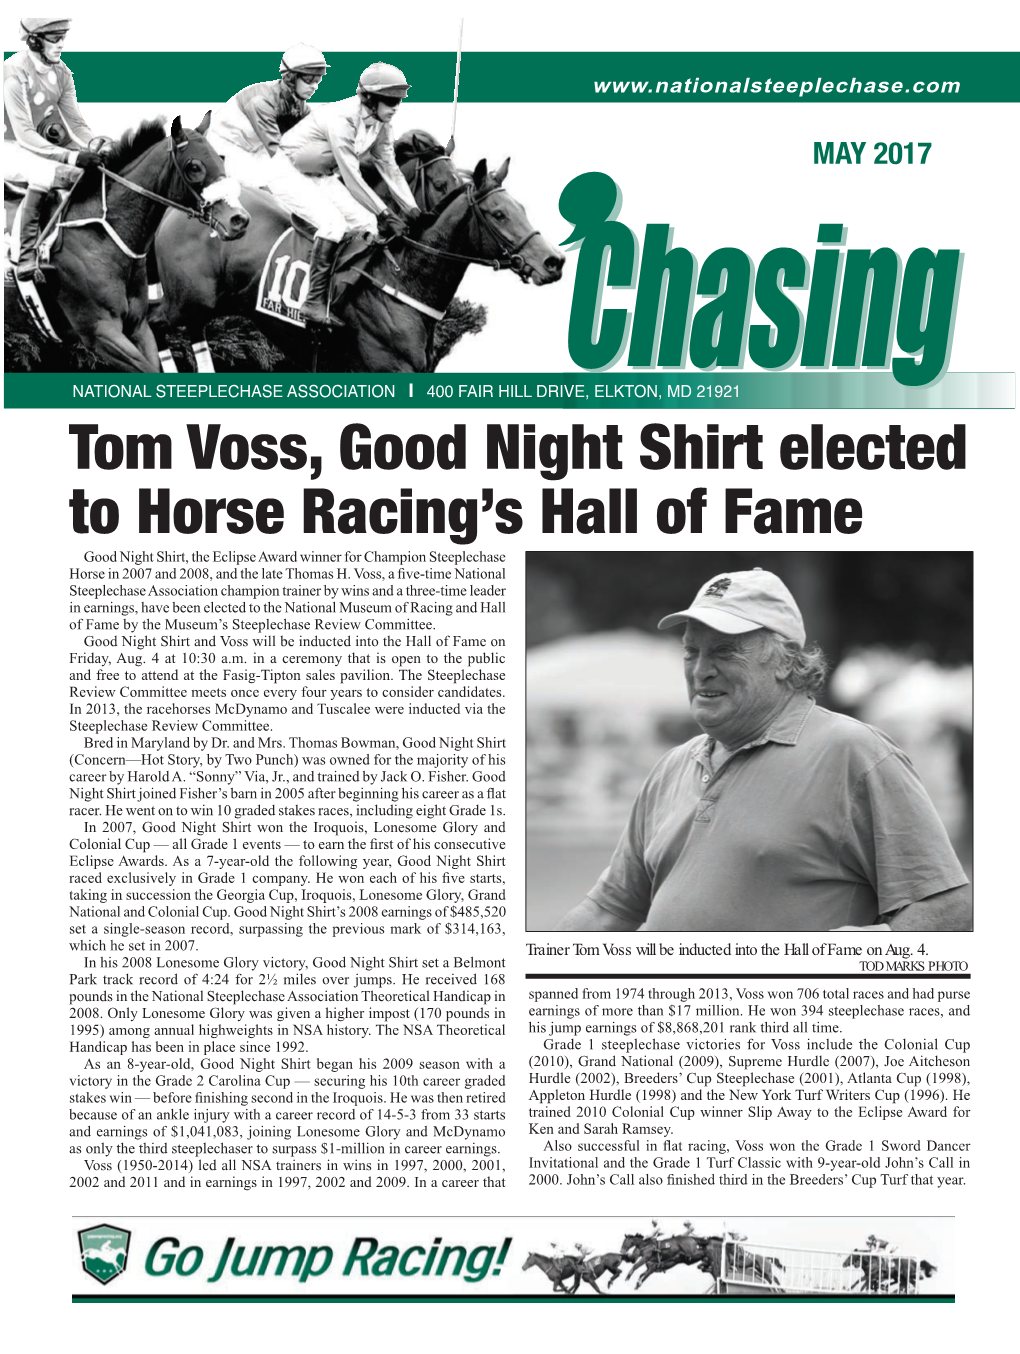 Tom Voss, Good Night Shirt Elected to Horse Racing's Hall of Fame